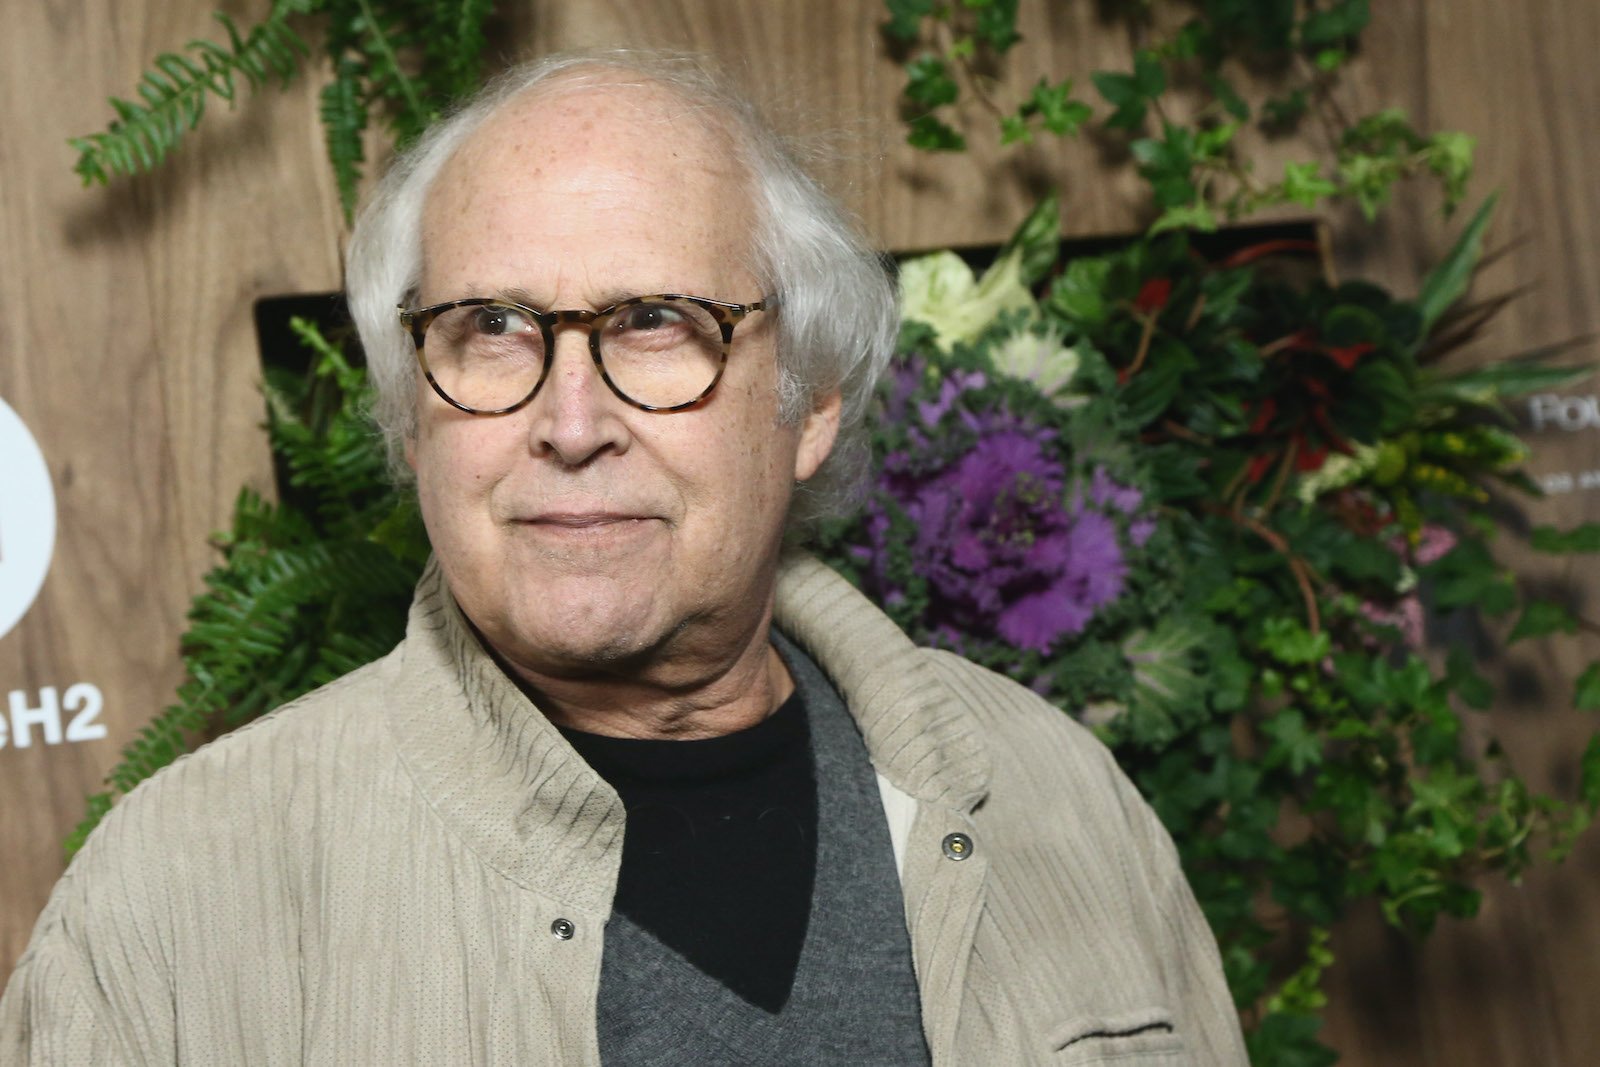 Chevy Chase attended the Global Green 2019 Pre-Oscar Gala at Four Seasons Hotel